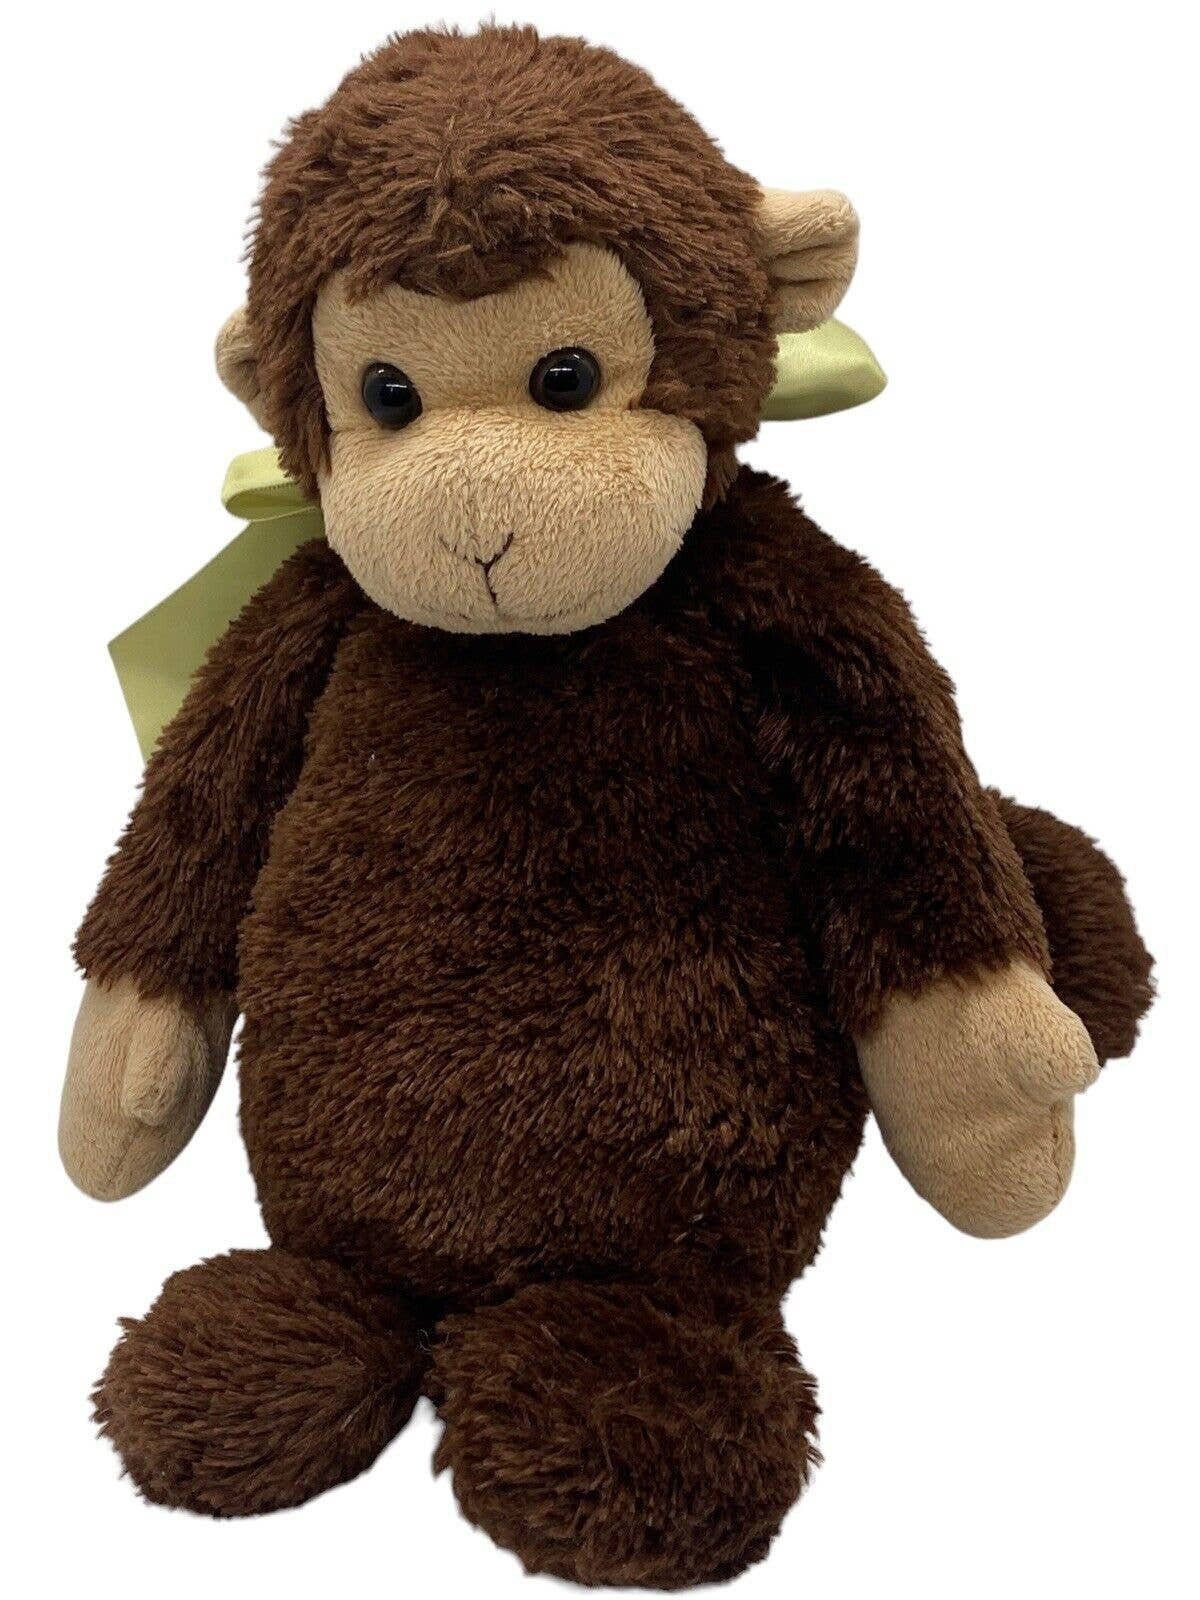 MorisMos Clearance Stuffed Animals Under 10 Dollars, 12 inch Plush Monkey  with Banana, Cheap Monkey Stuffed Animal, 2-in-1 Toy Set for Kids Christmas